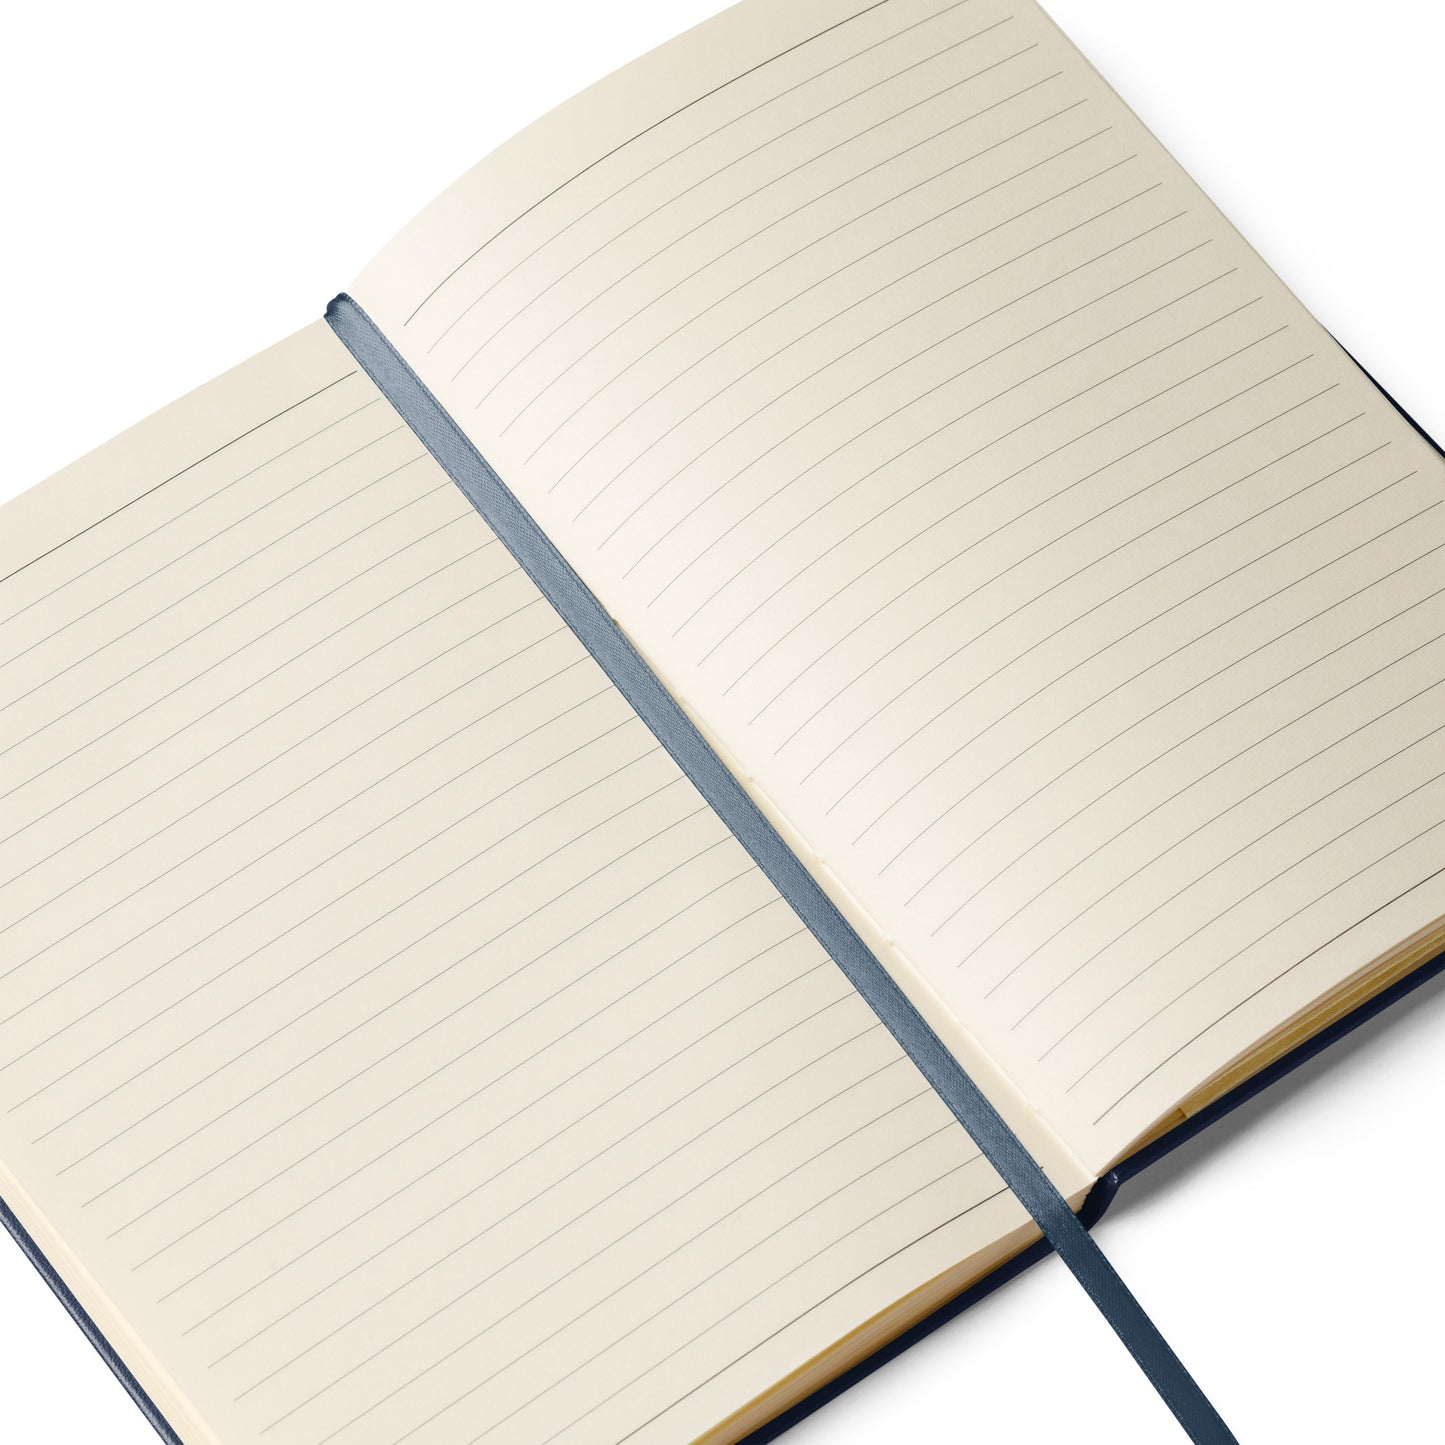 Serve First hardcover notebook